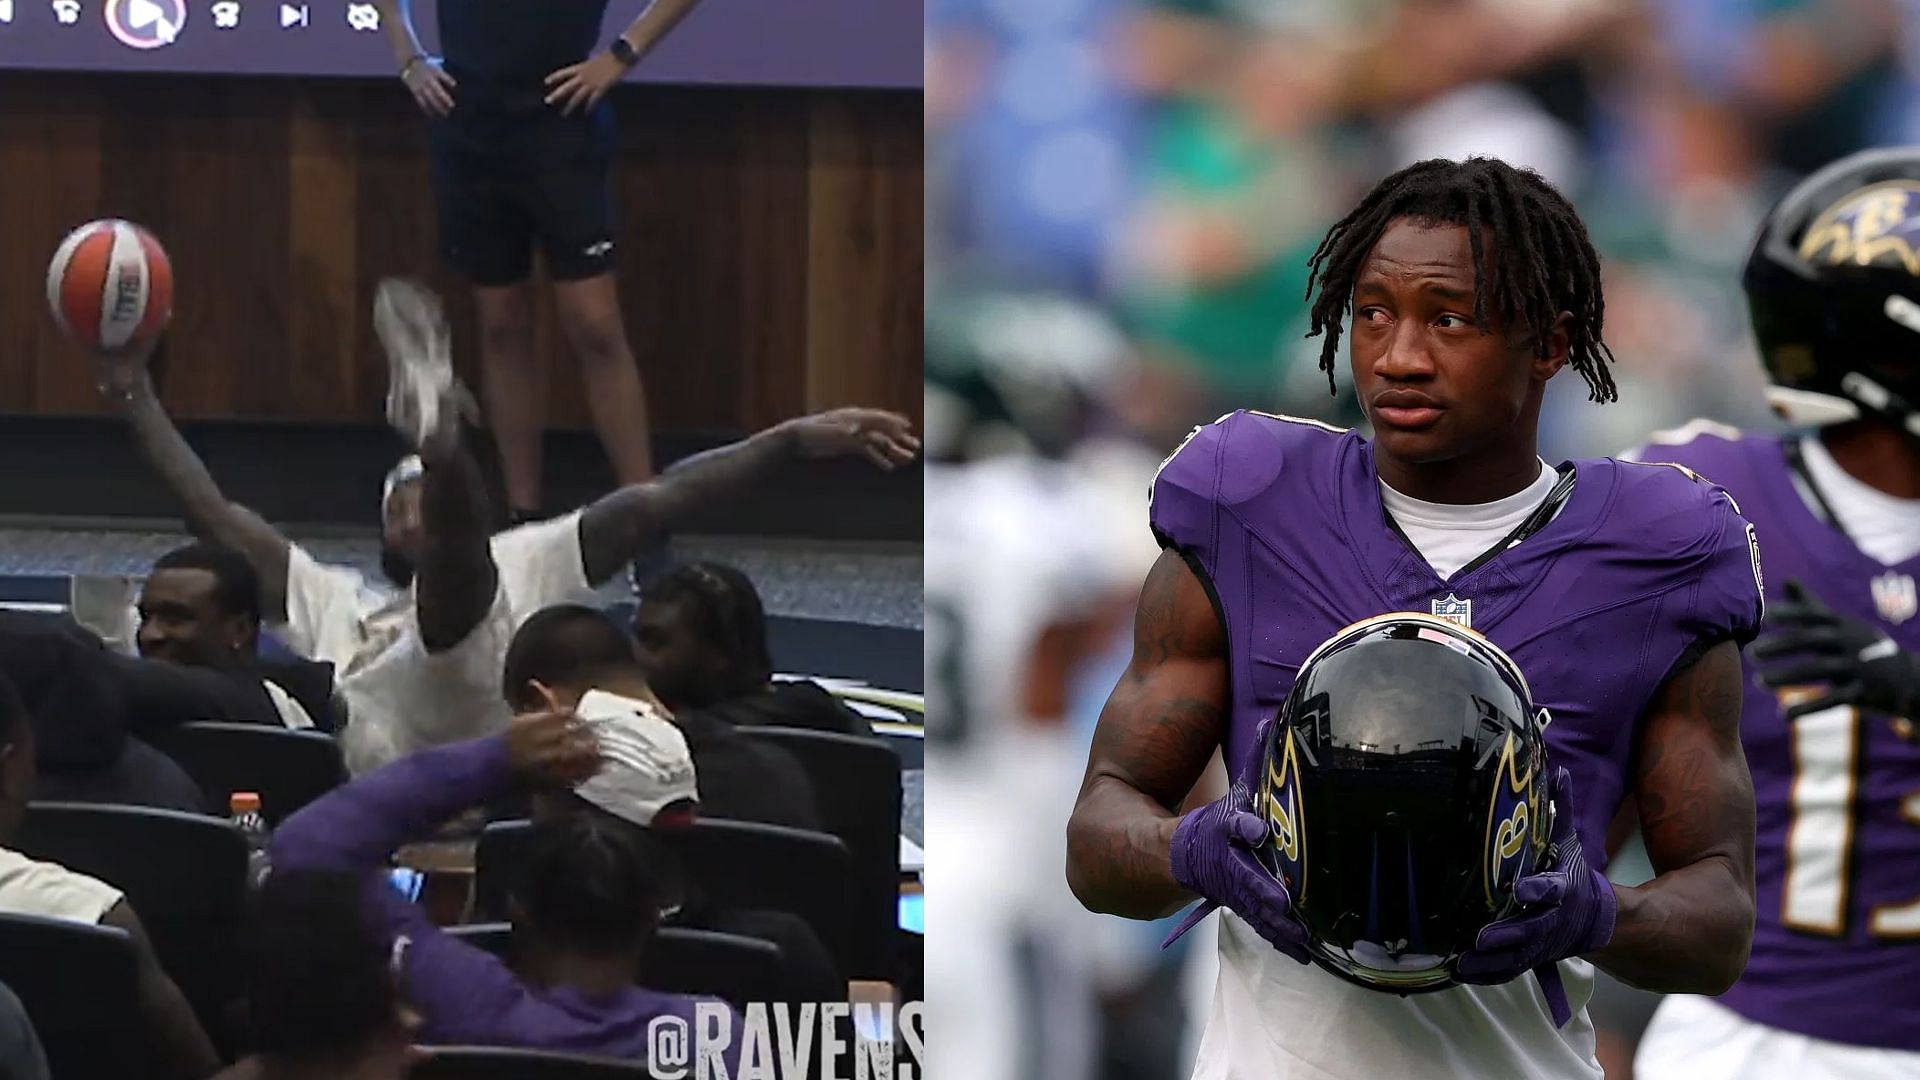 Ravens players go wild after finding out Flowers